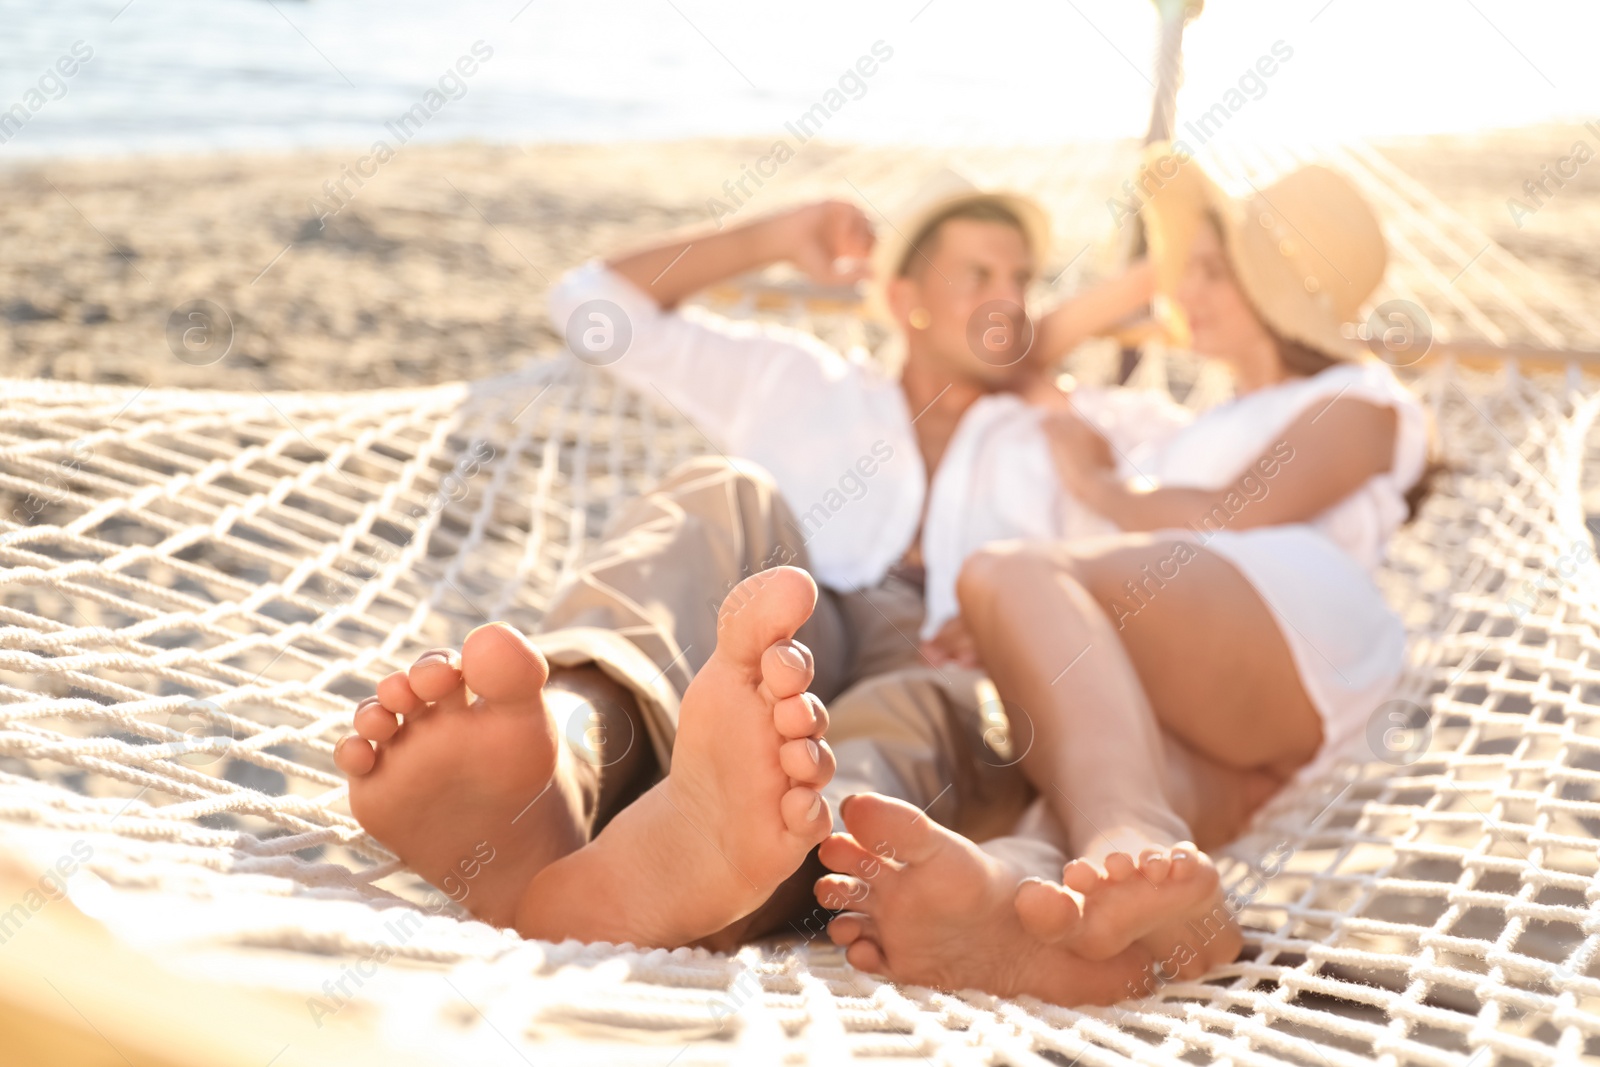 Photo of Couple relaxing in hammock outdoors, focus on legs